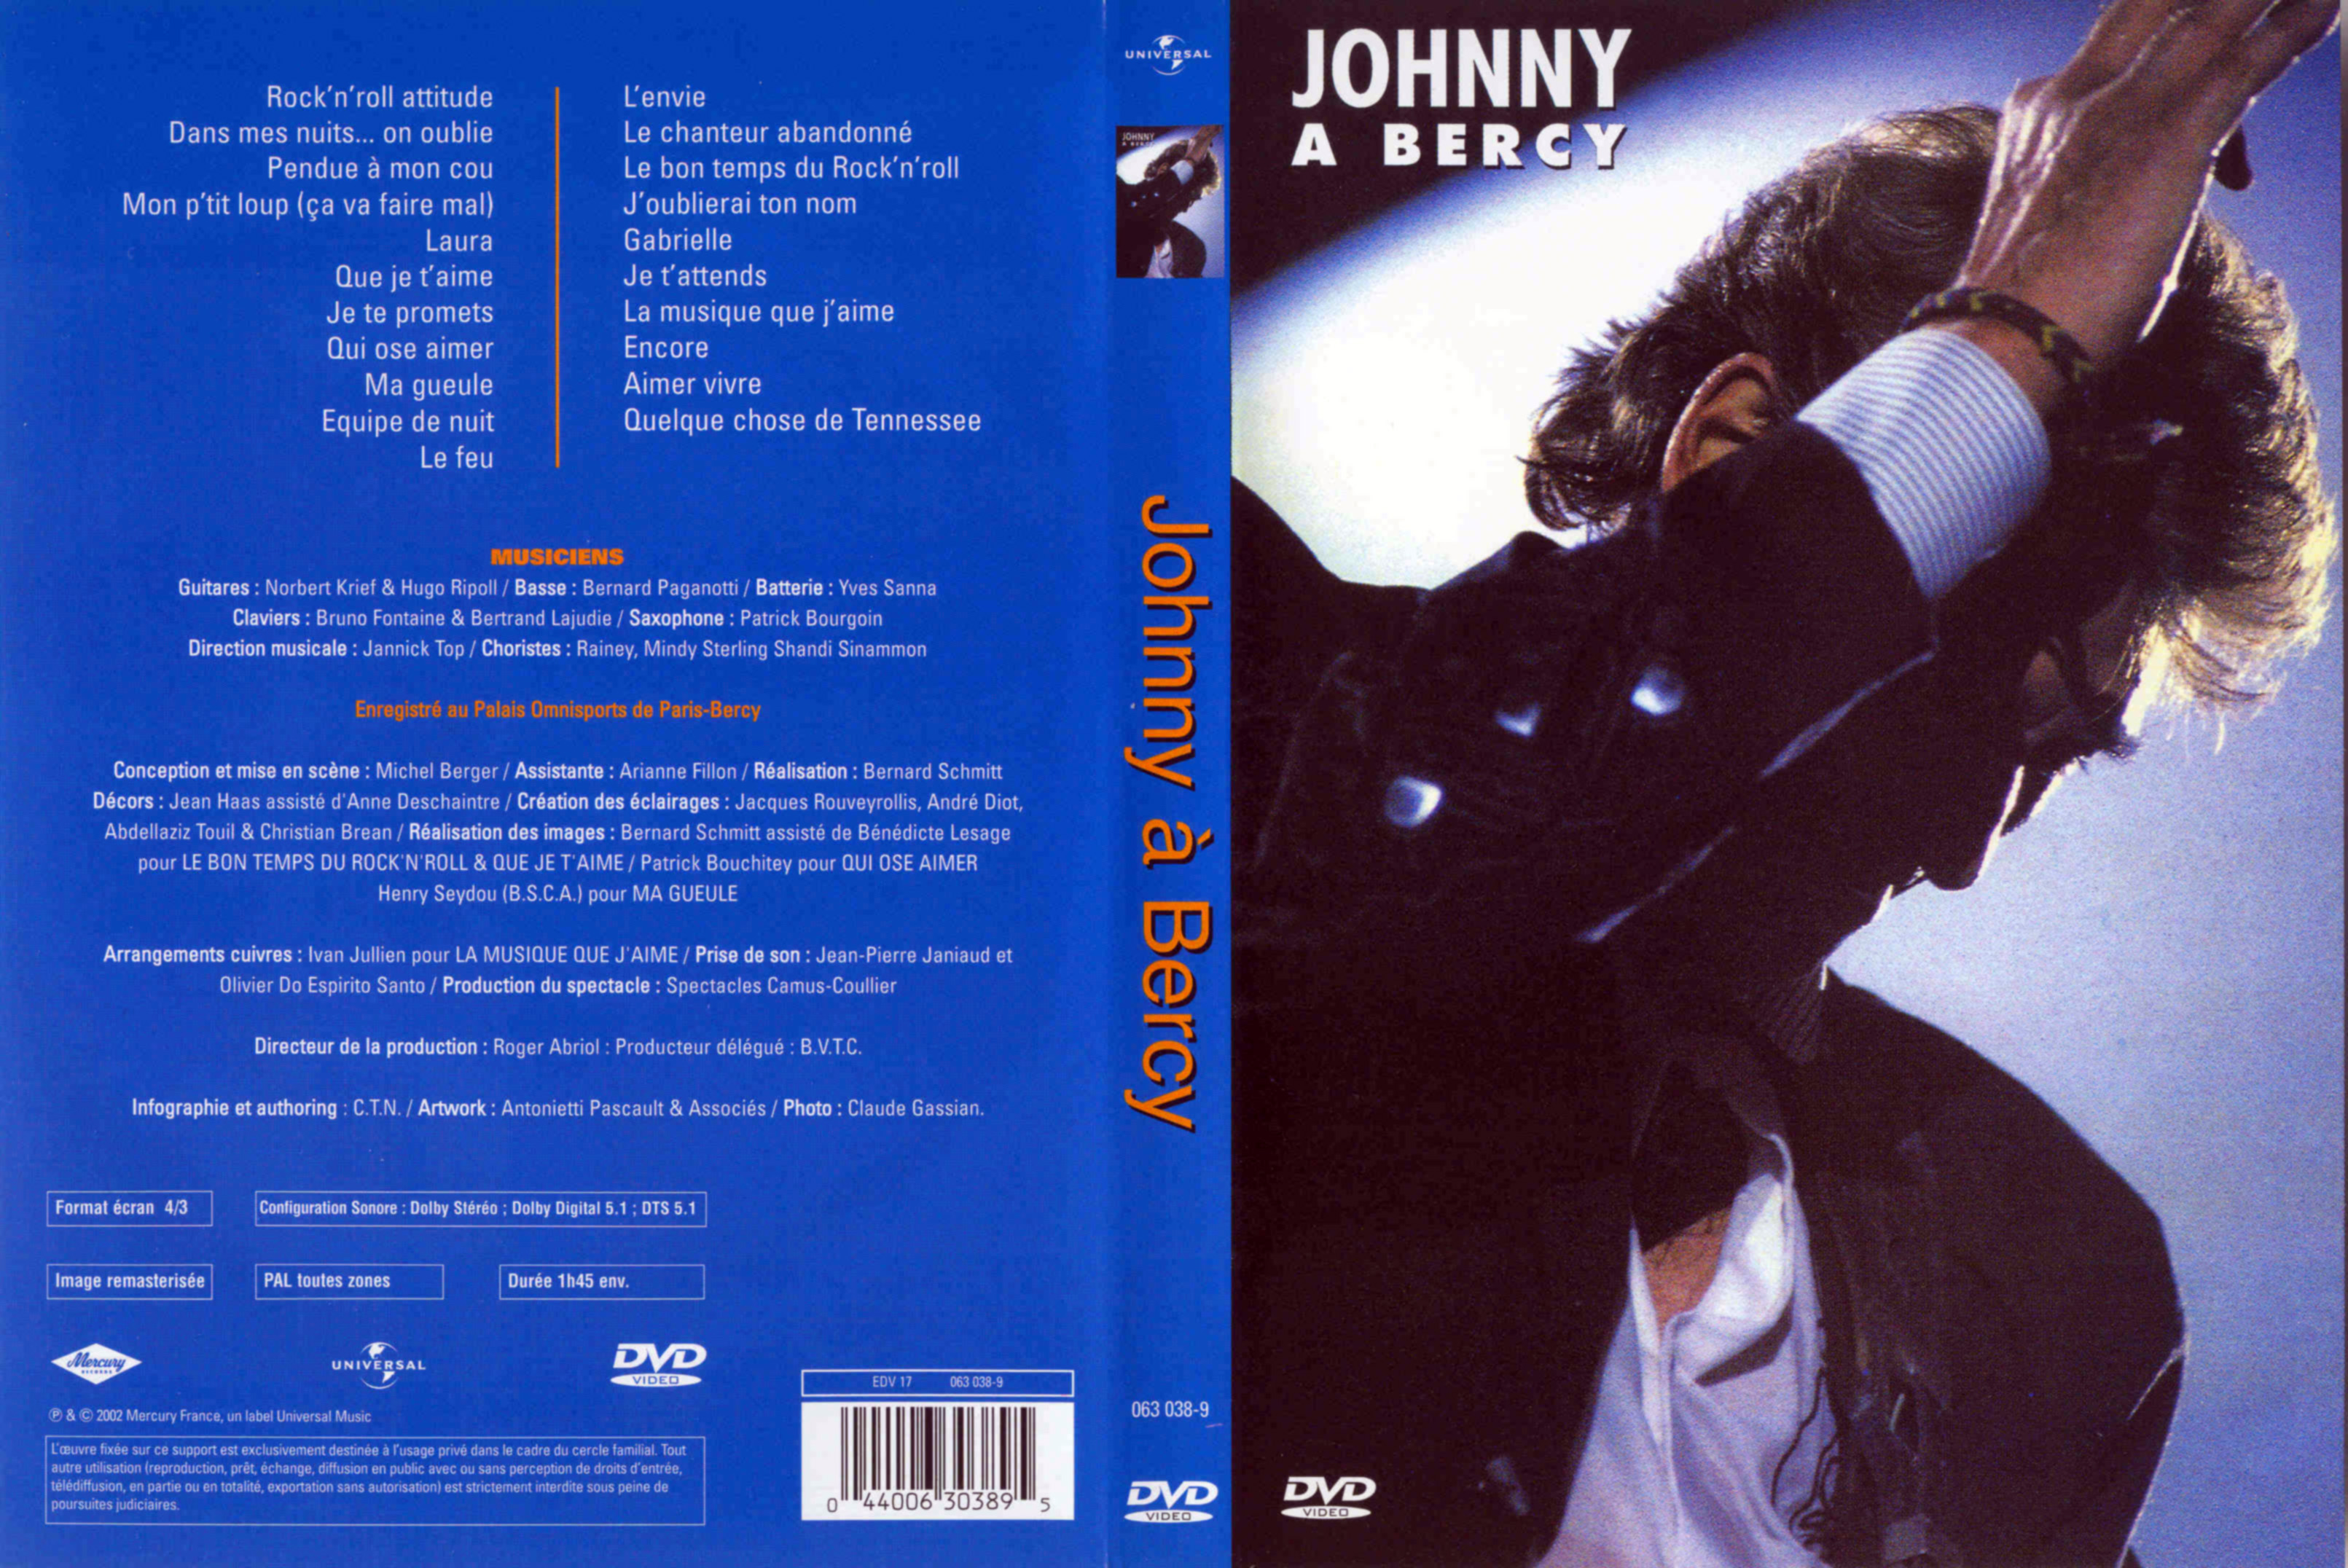 Jaquette DVD Johnny  Bercy 1987